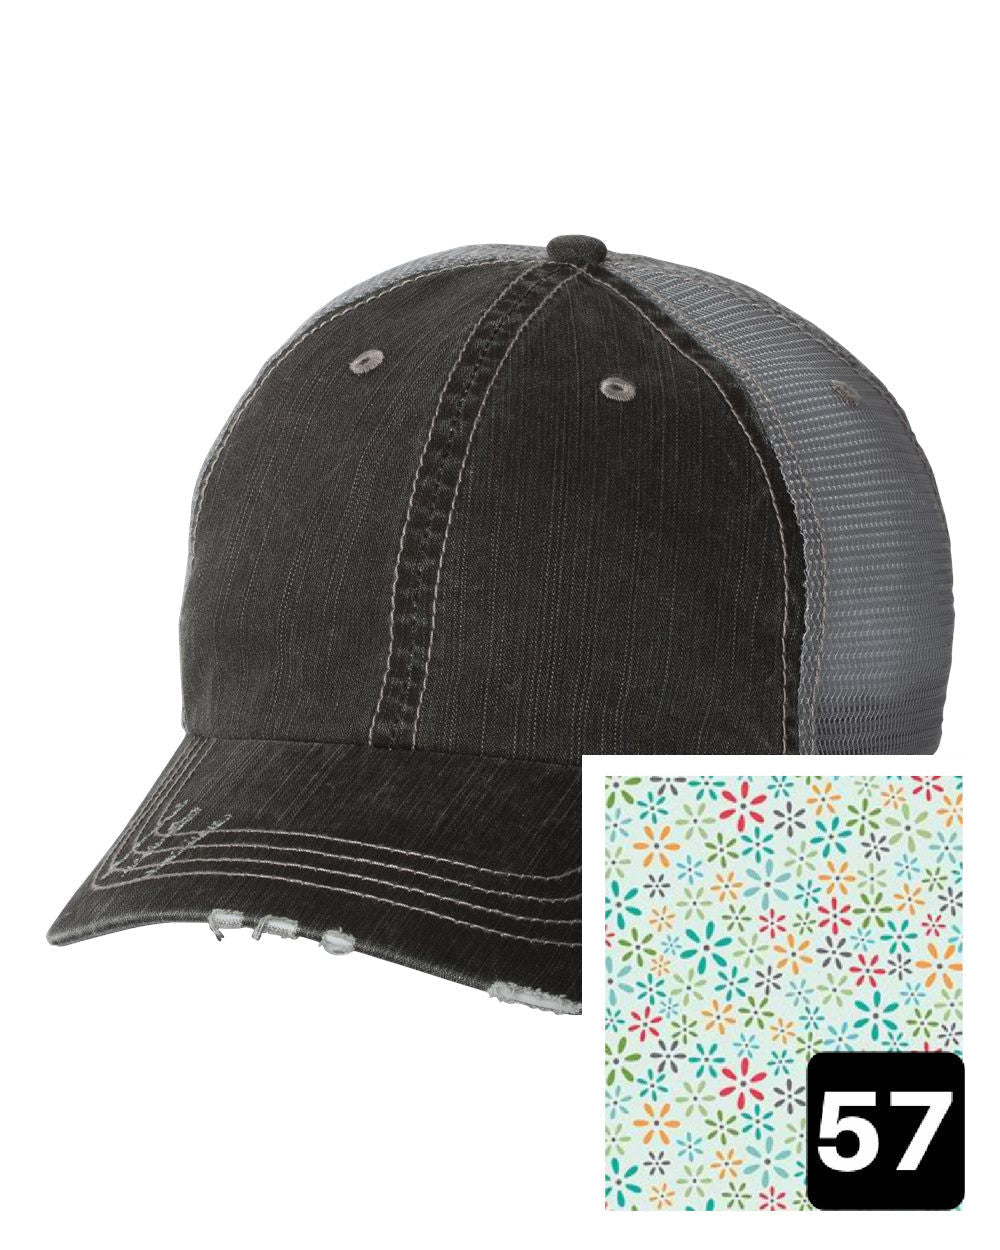 gray distressed trucker hat with white daisy on yellow fabric state of Alaska